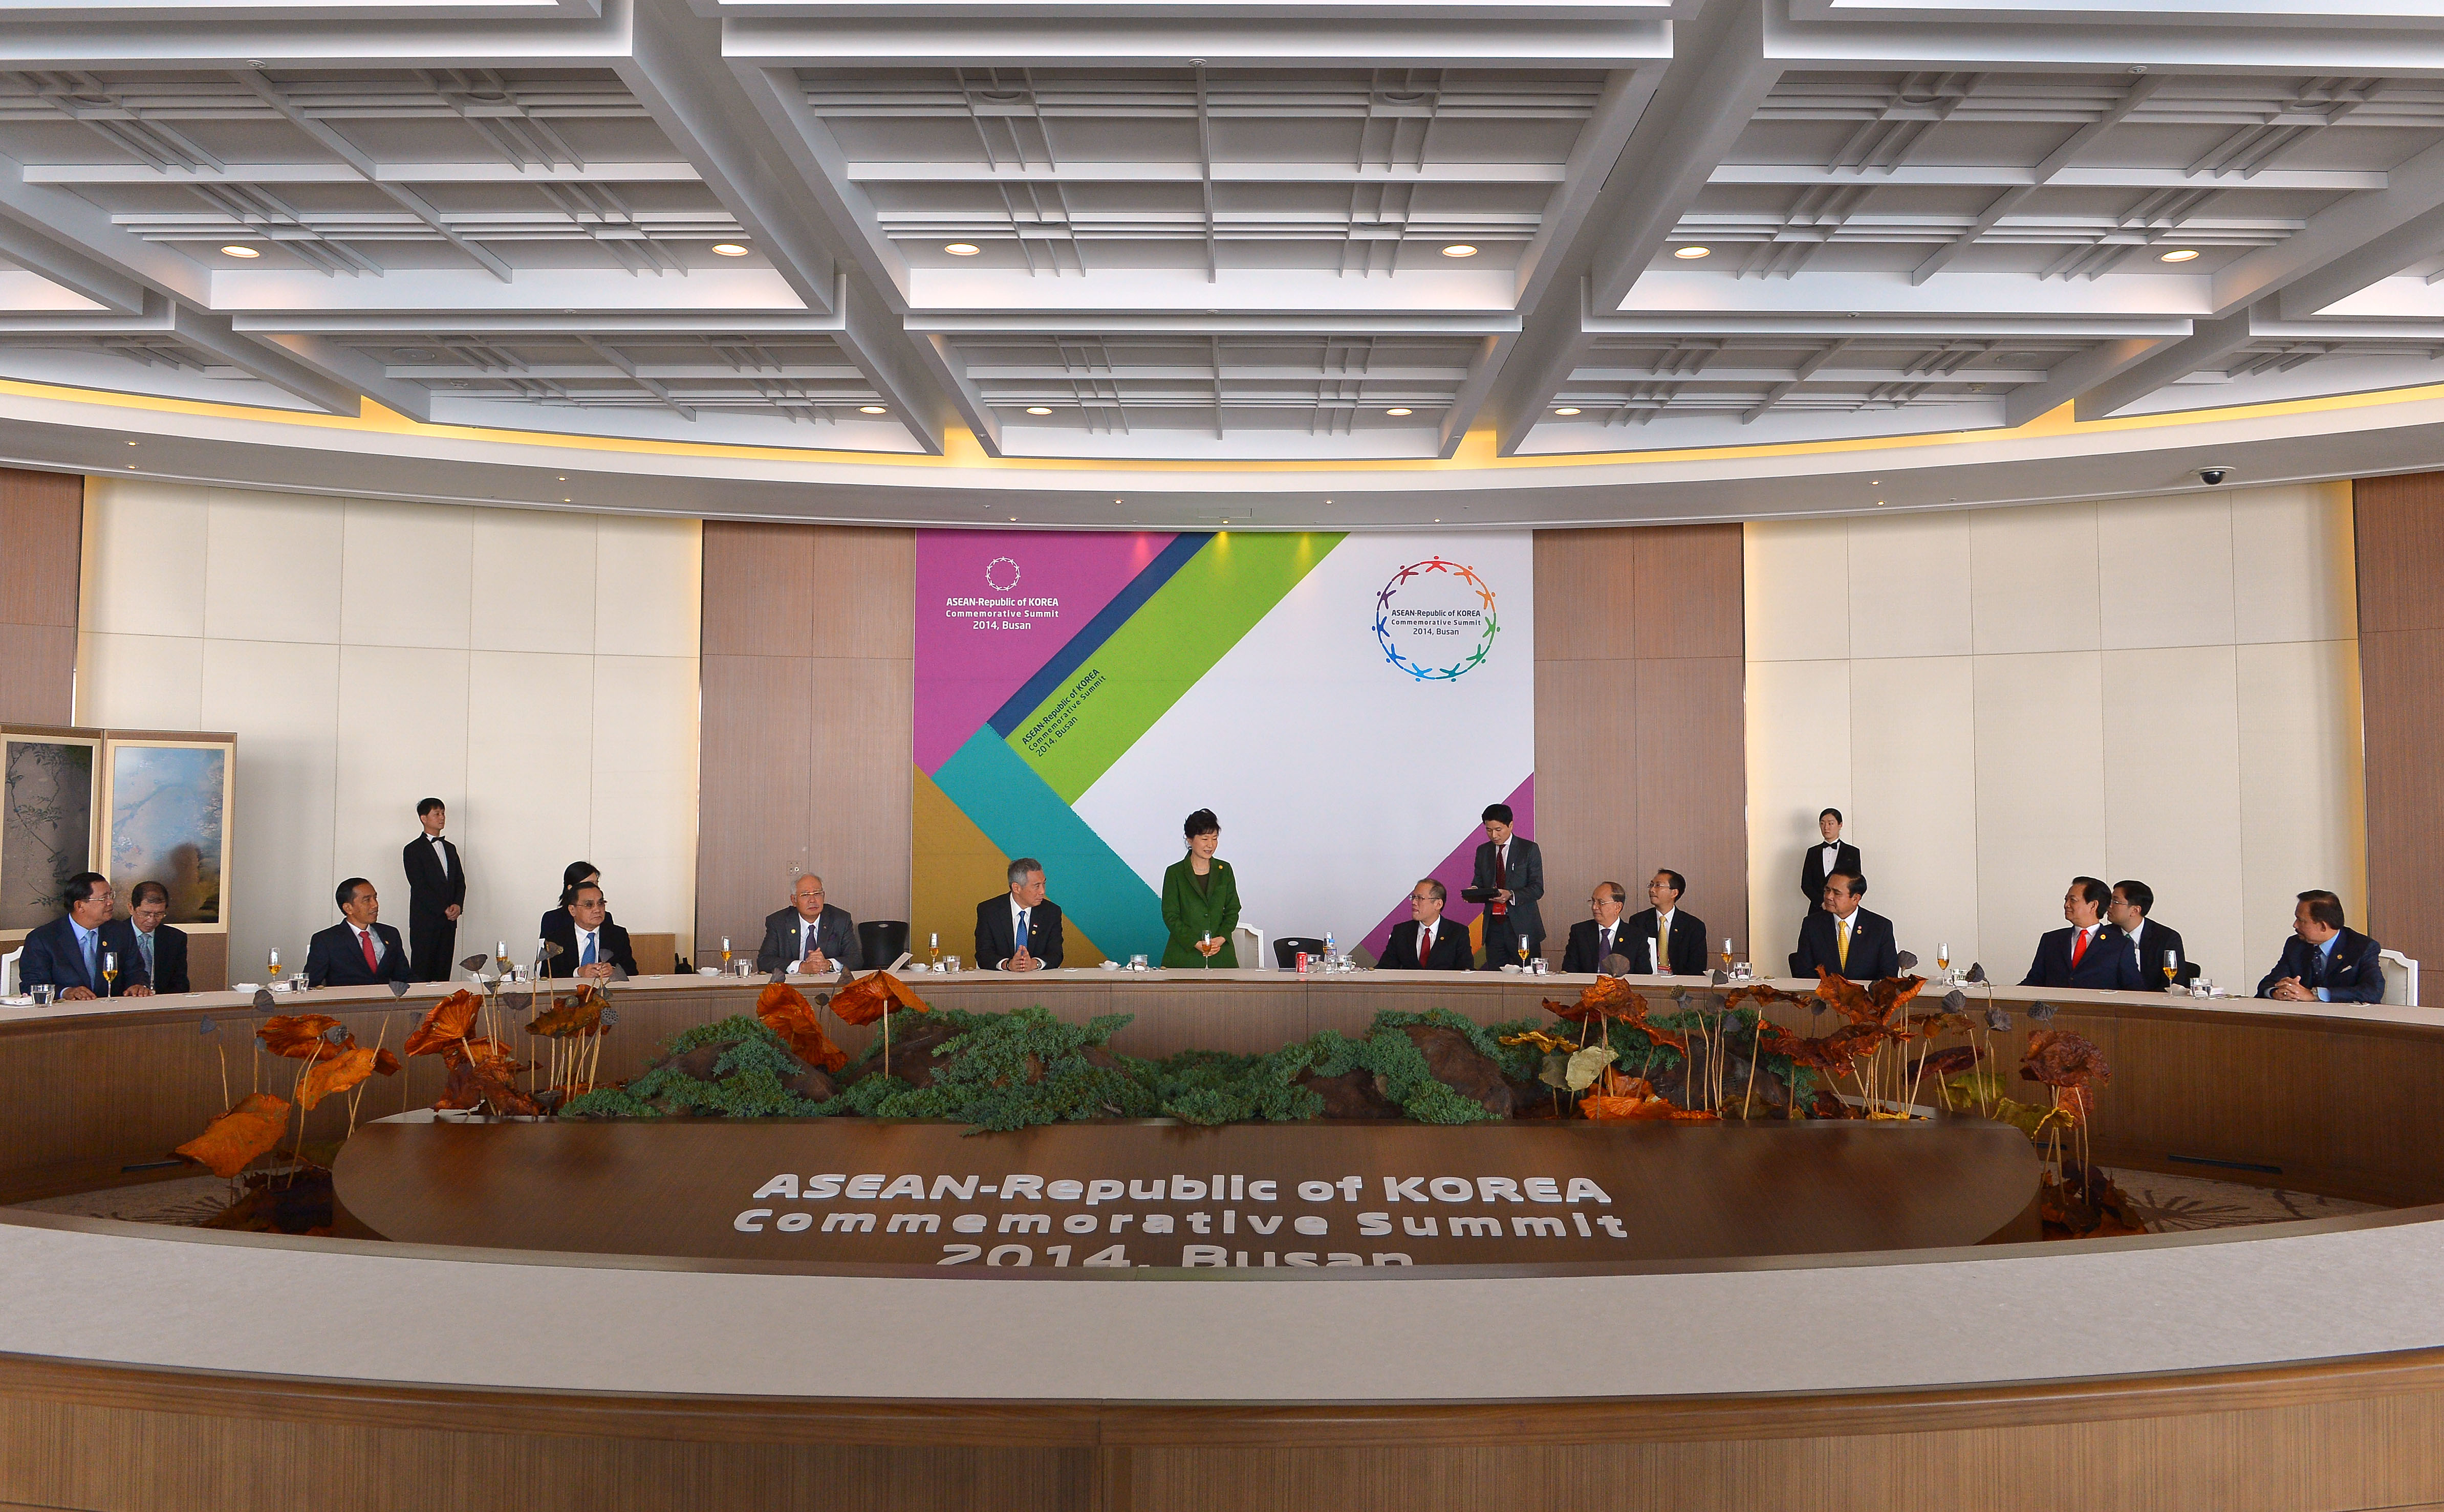 Prime Minister Lee Hsien Loong attending the ASEAN-ROK Commemorative Summit - Dec 2014 (ST Photo © Singapore Press Holdings Limited. Reproduced with permission)